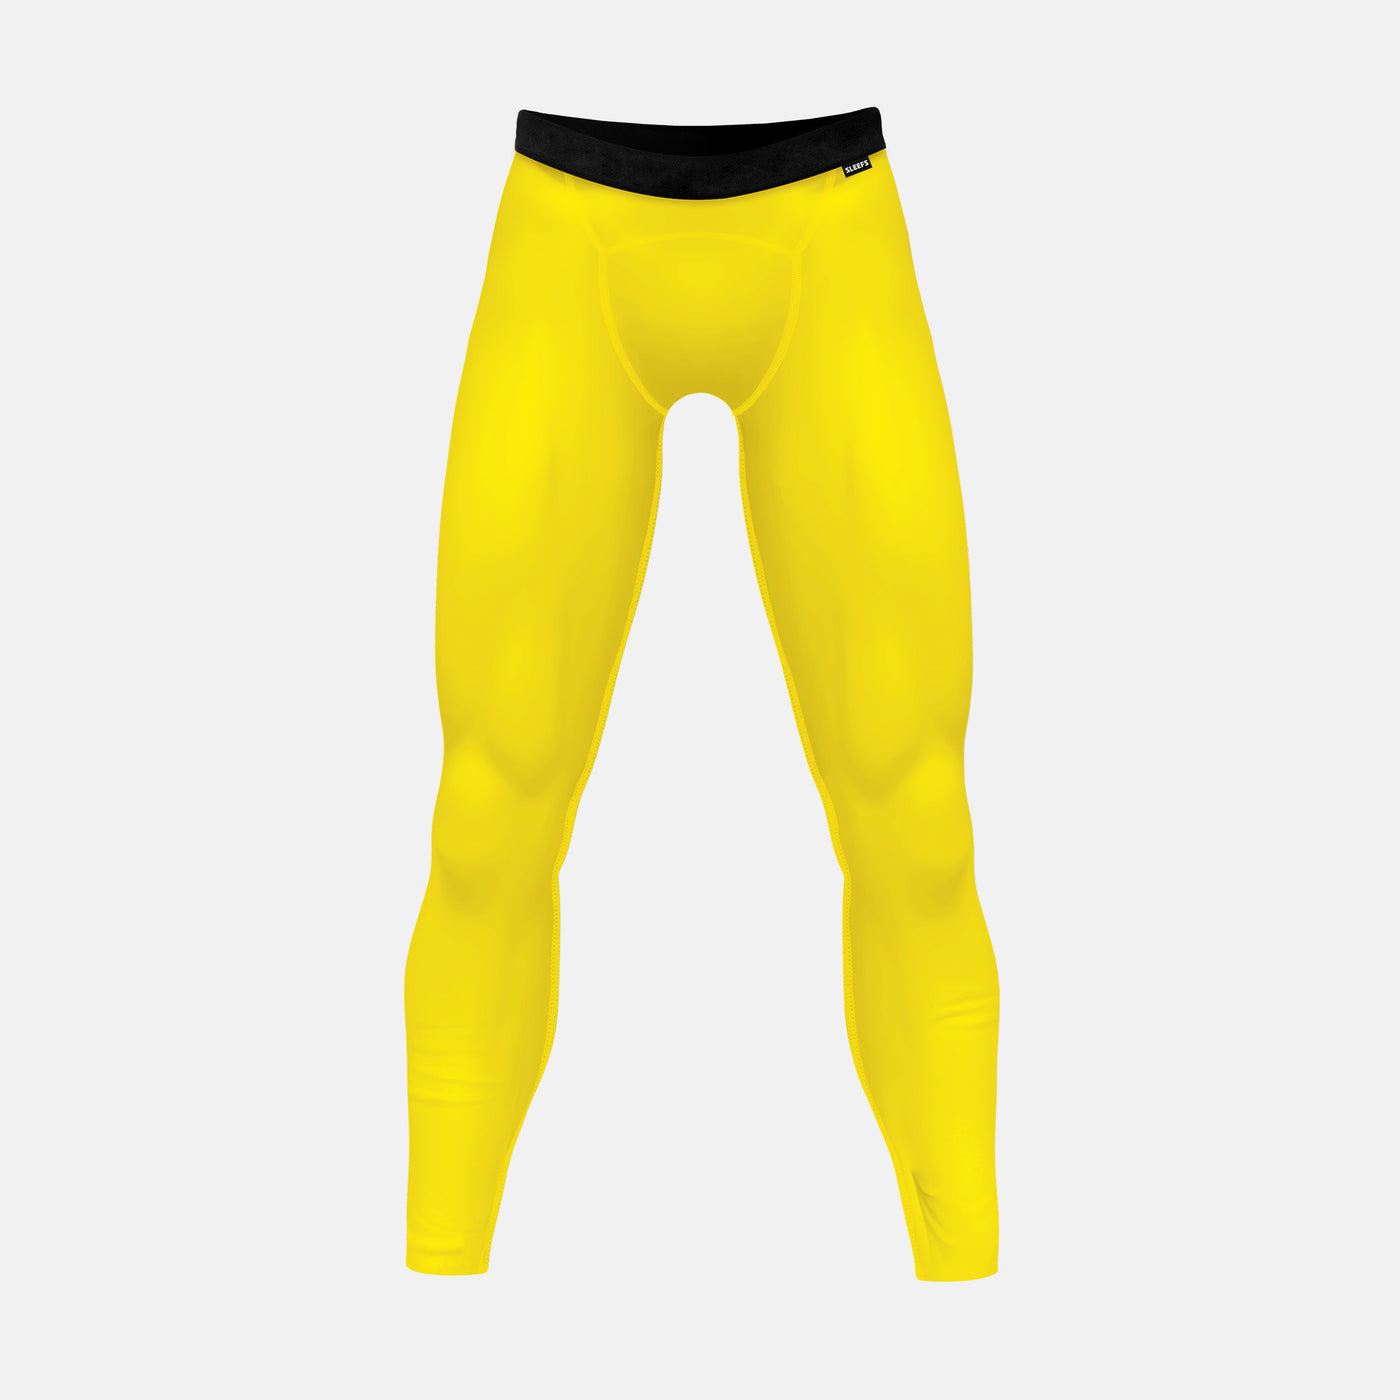 Hue Yellow Tights for men